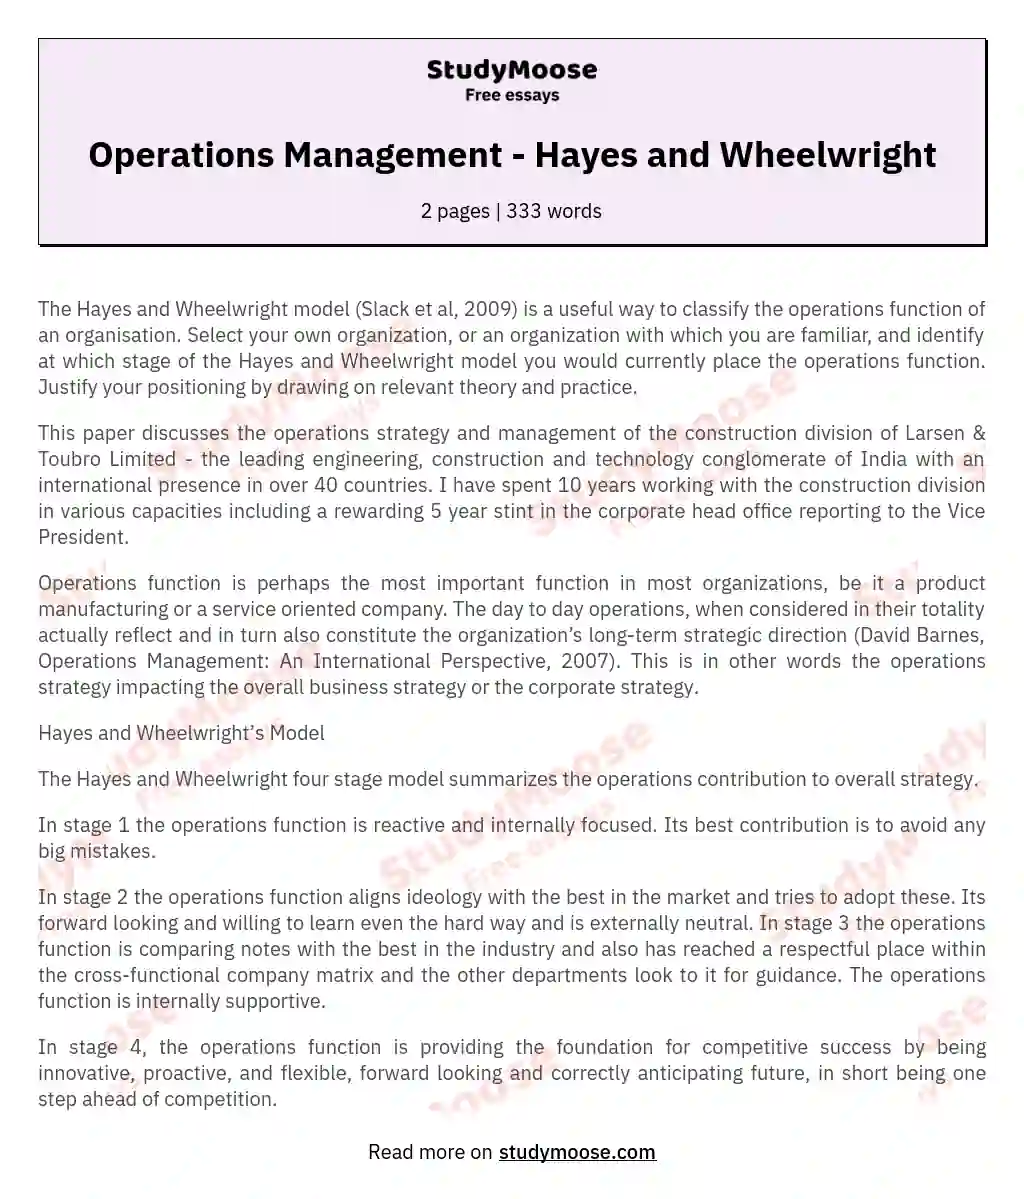 Operations Management - Hayes and Wheelwright essay